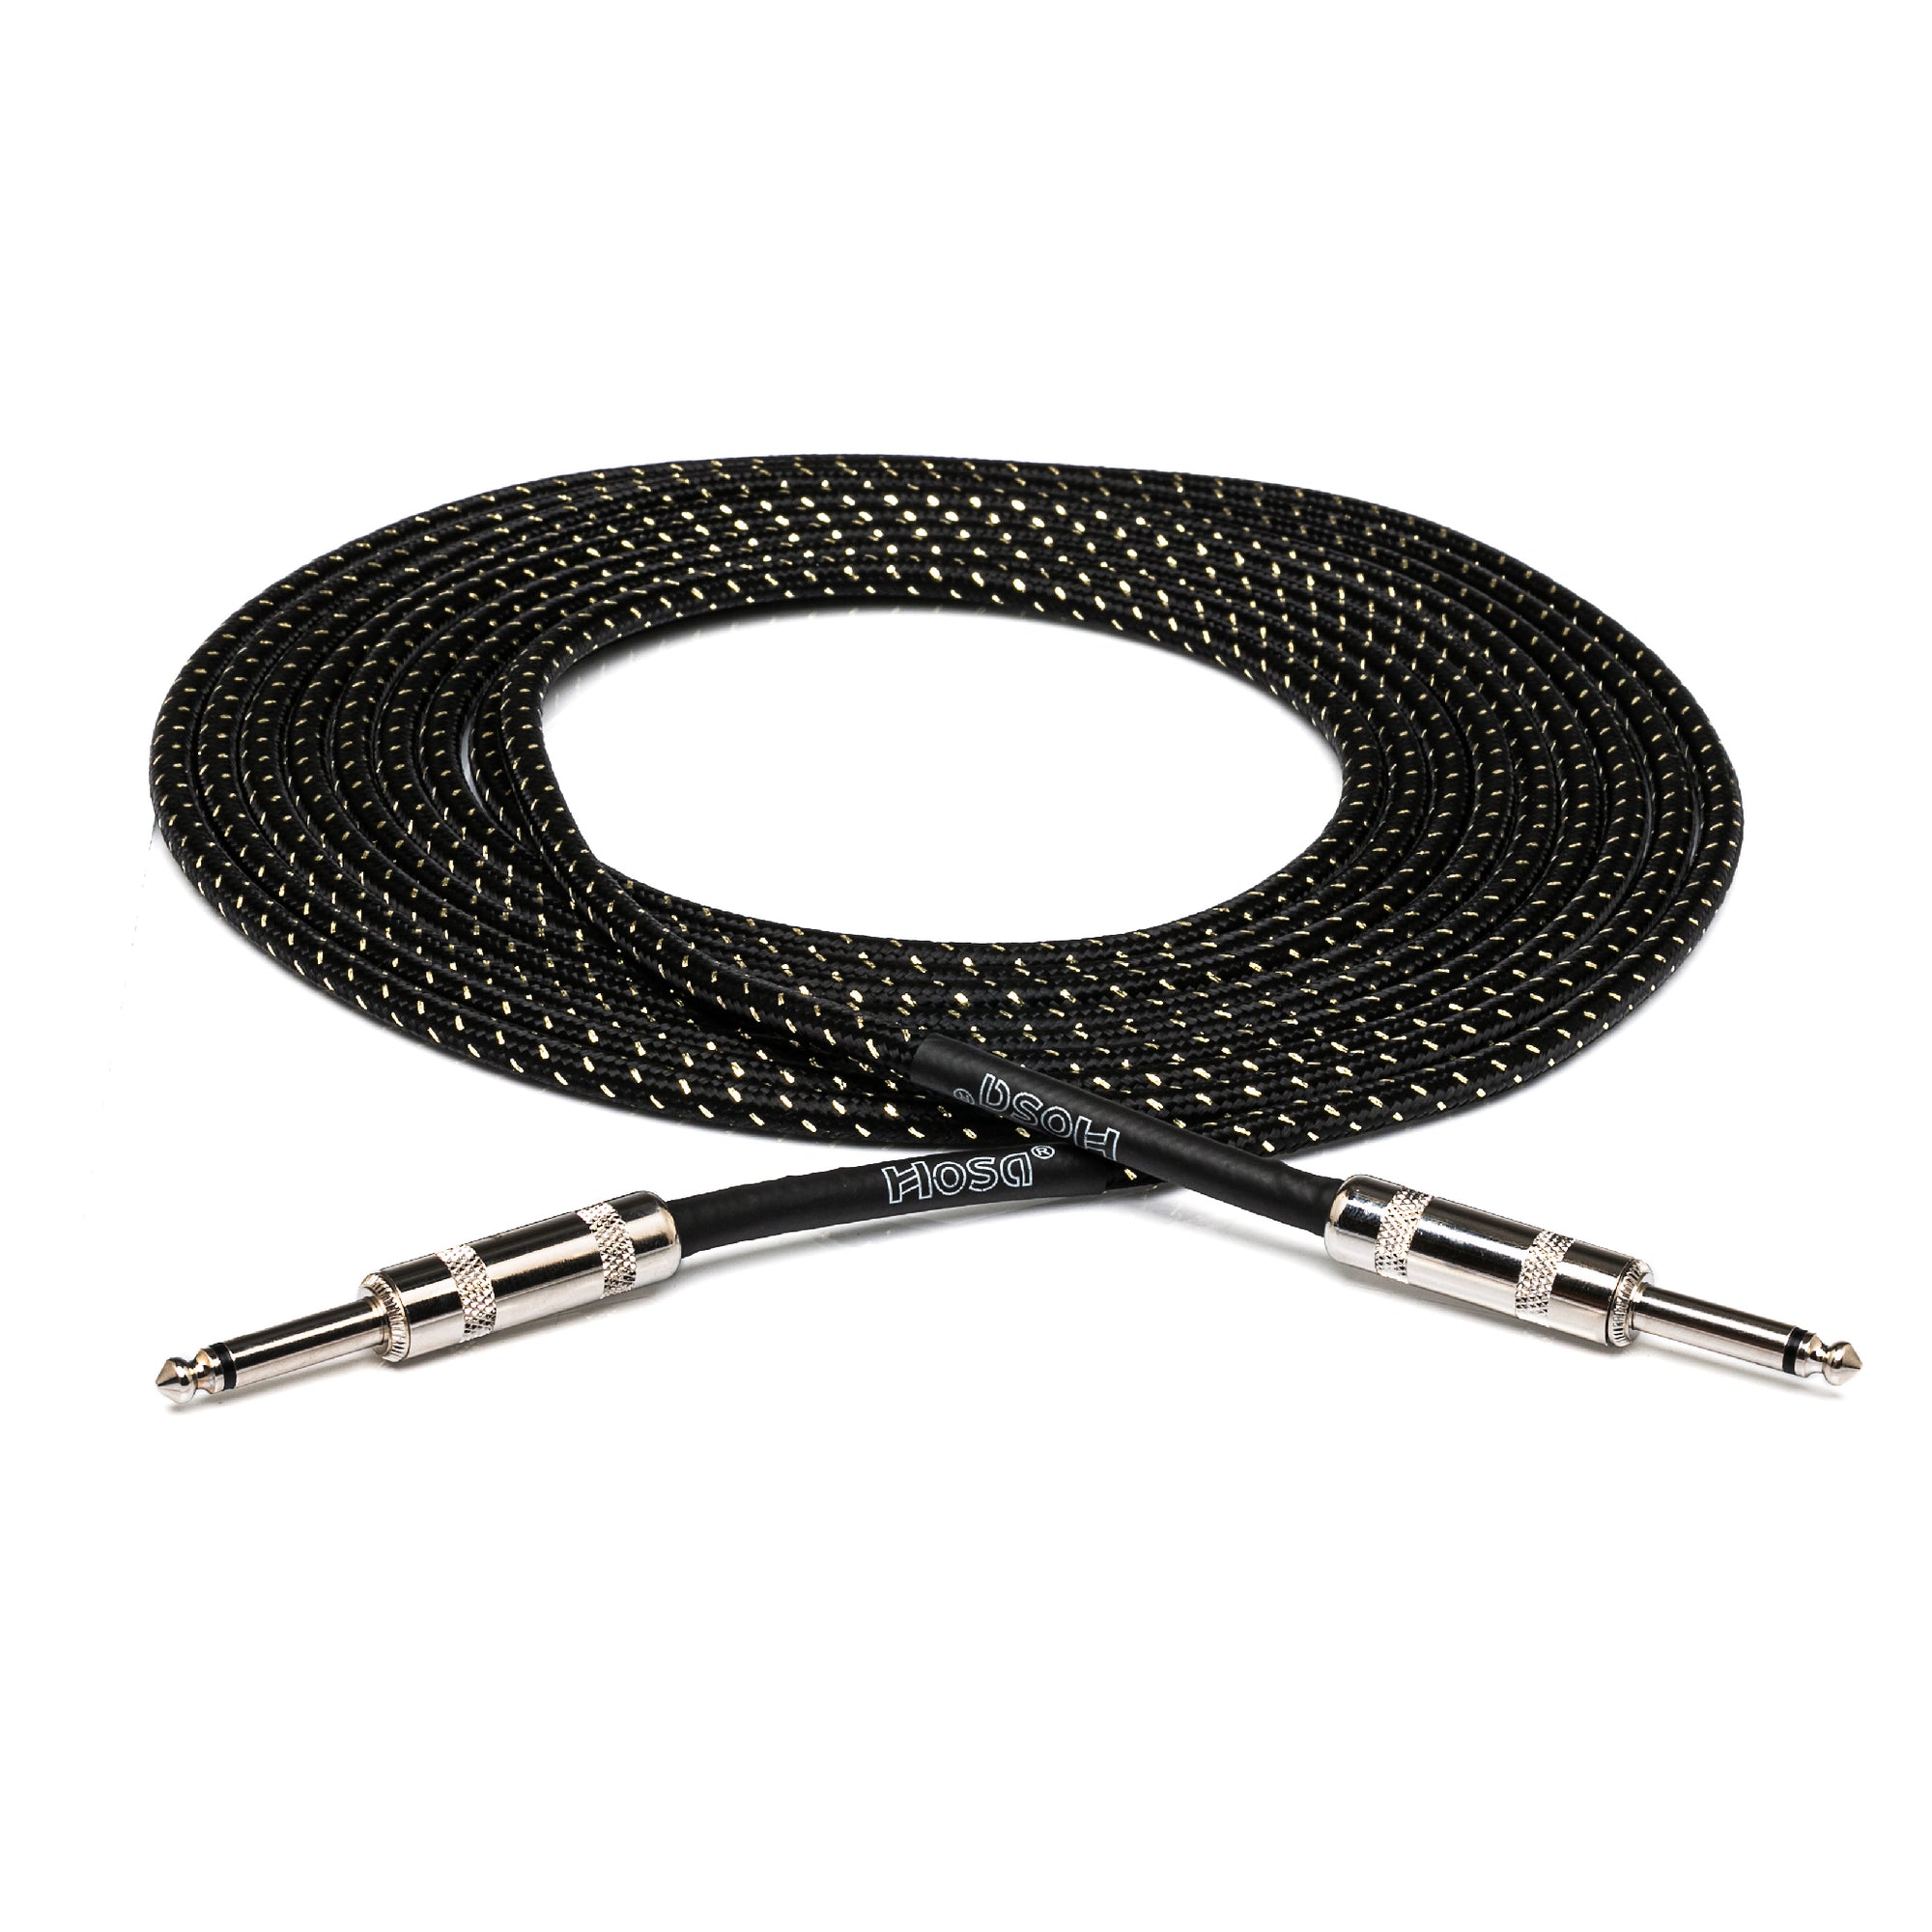 Hosa 3GT-18C4 18ft Black/Gold Cloth Guitar Cable Product